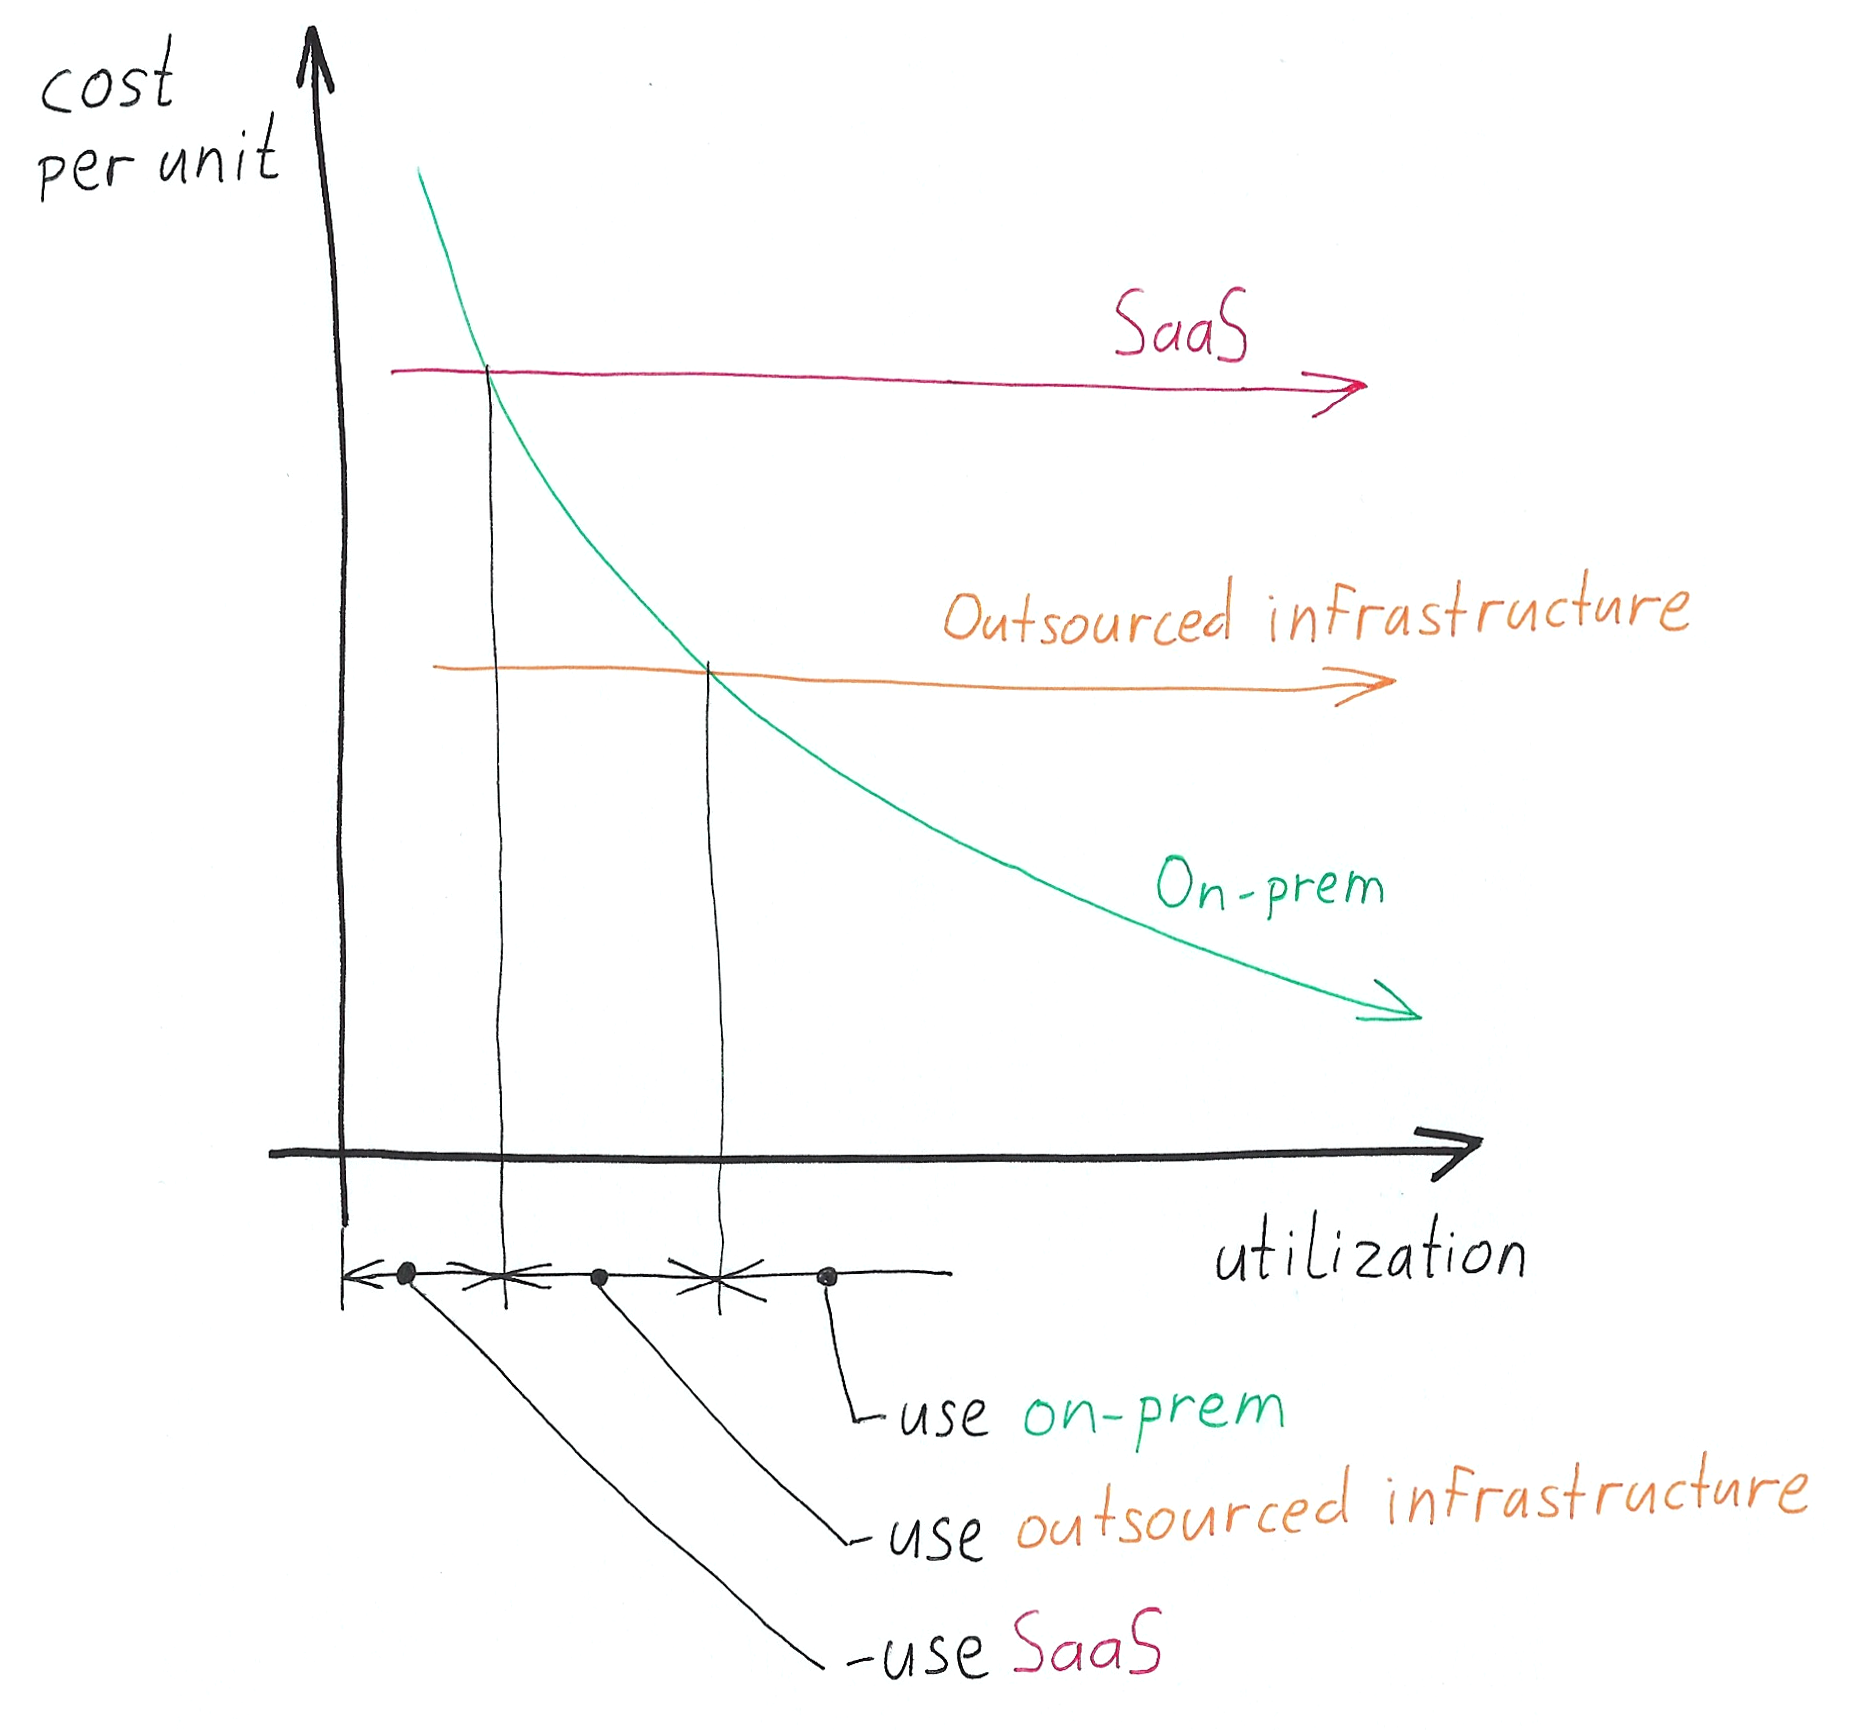 Illustration of cost per unit v utilization for three different deployment options